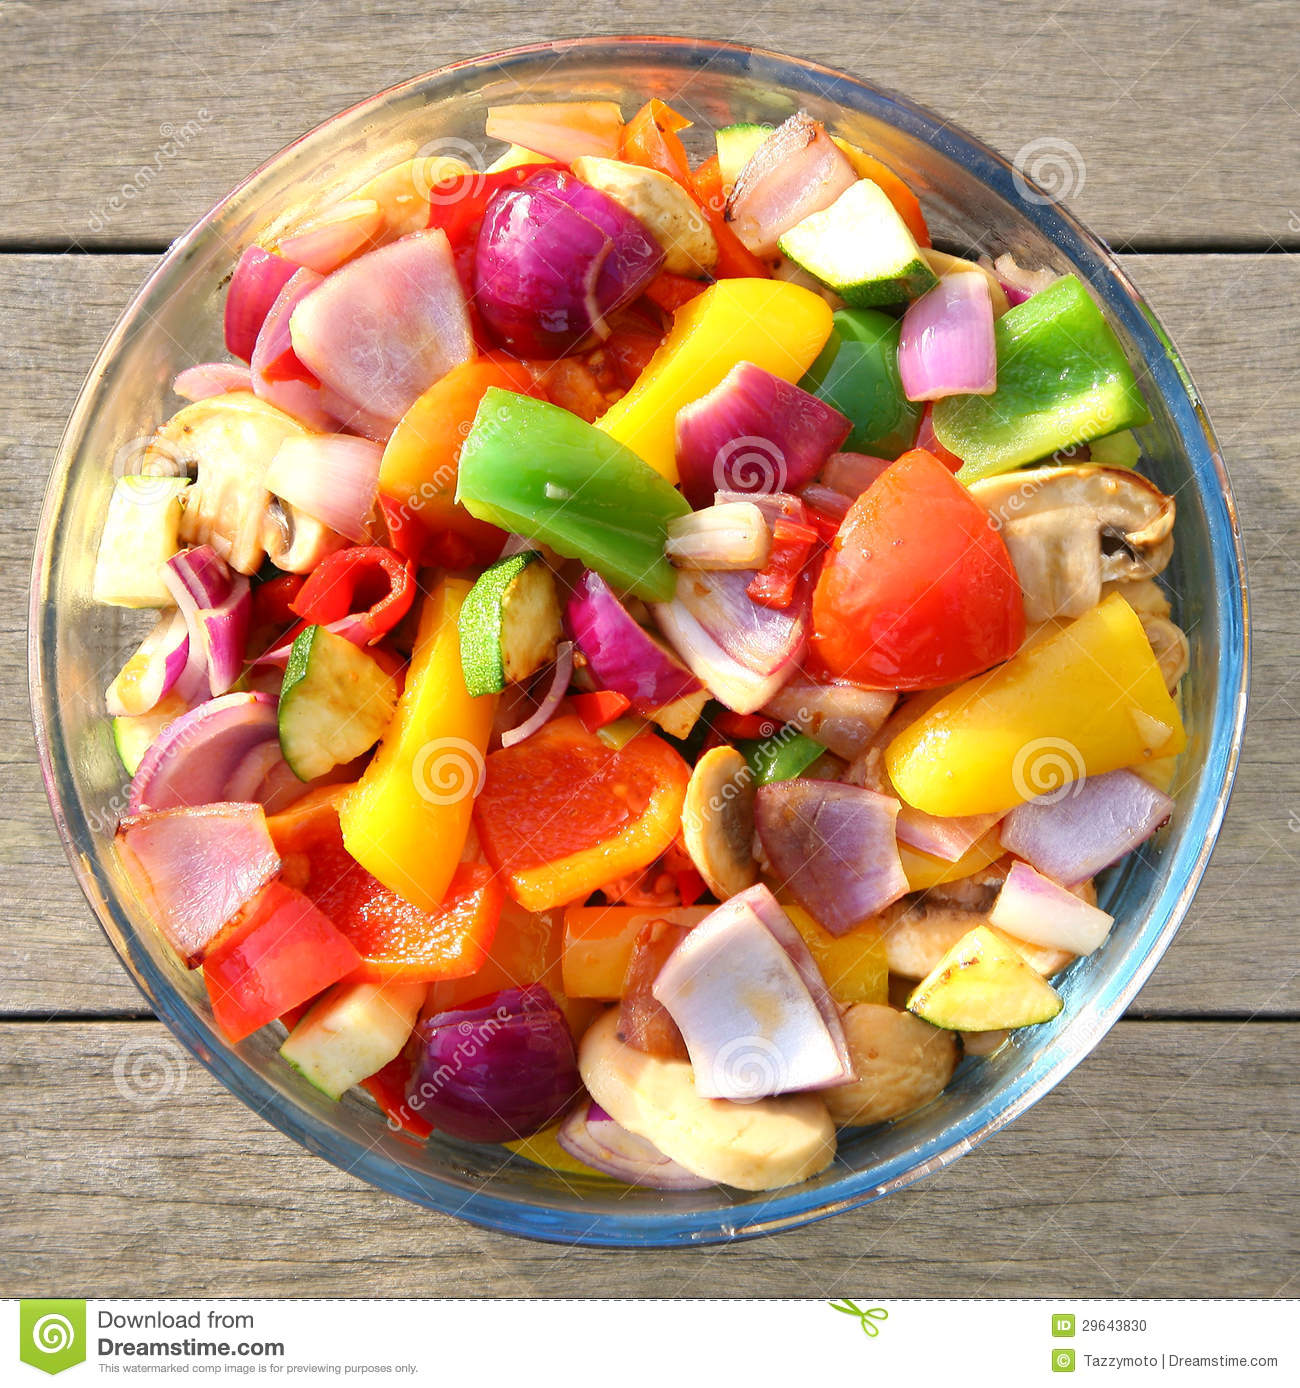 Bowl Of Freshly Cooked Colorful Vegetables Stock Photo   Image    